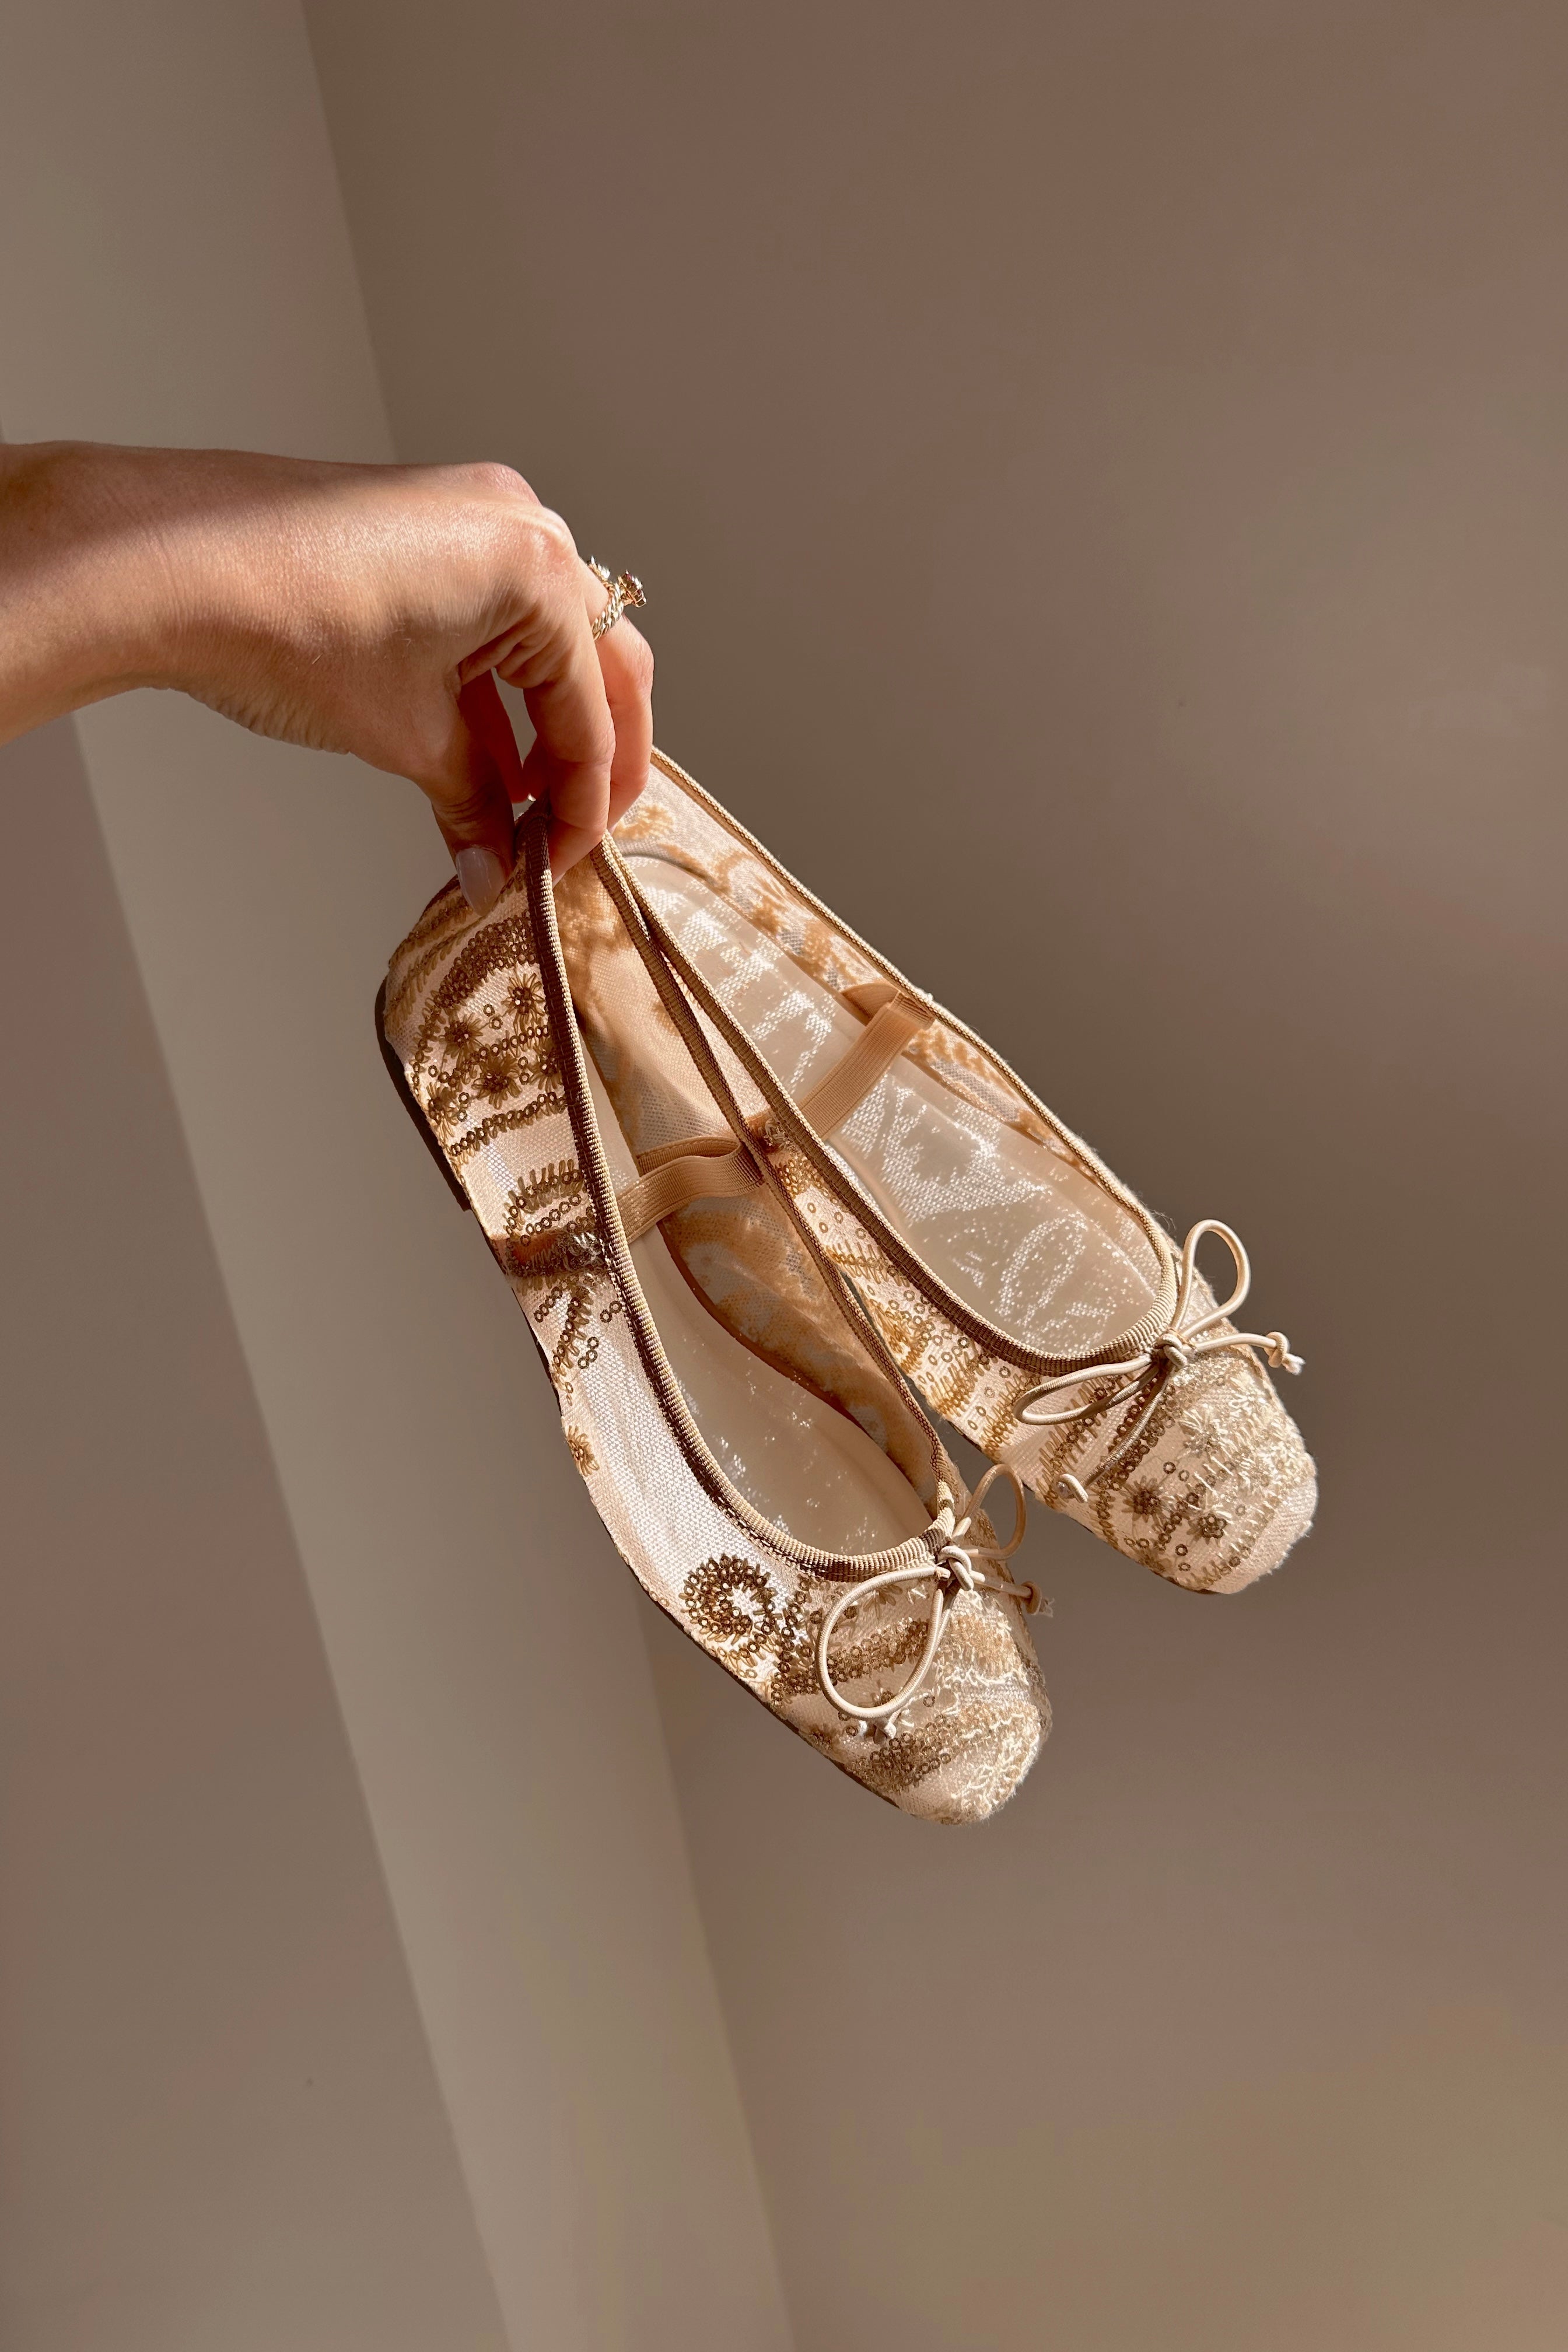 Side view of hand that is holding the Bisbee Ballet Flat in Gold that have beige mesh, ivory embroidery, gold sequins, a bow on front, and an elastic strap across the foot.